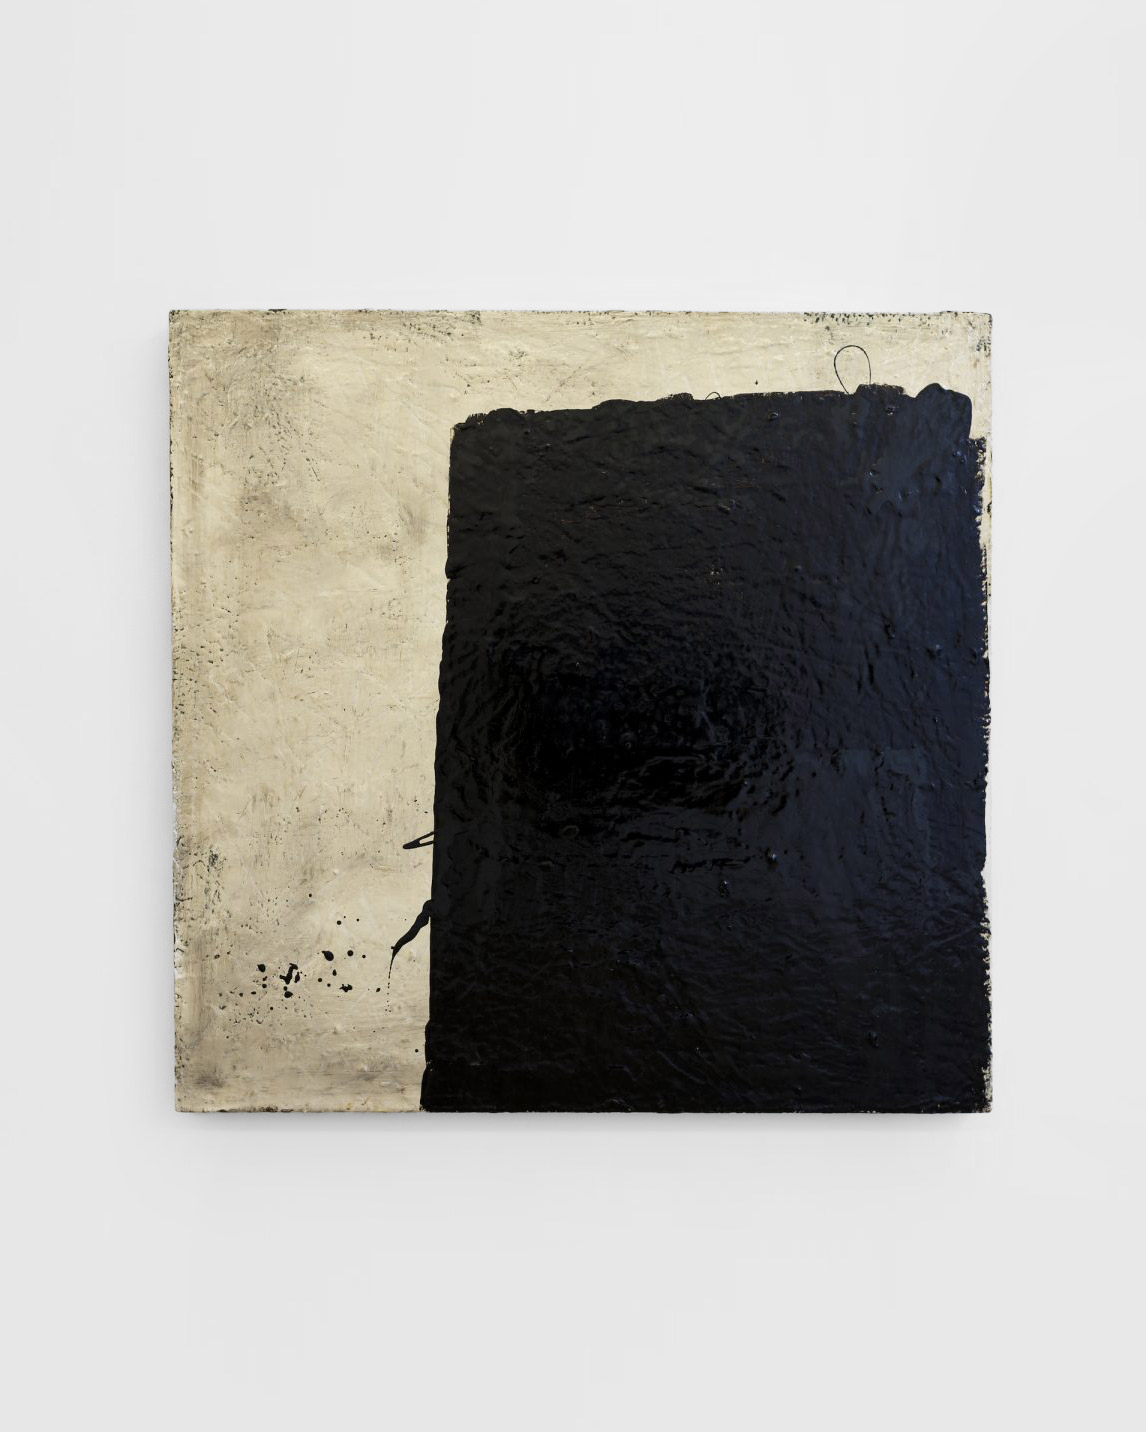 Eleanor Bartlett, Untitled No.56, 2017, Tar, metal paint on canvas, 110 x 112 cm © The Artist, Image Courtesy Tin Type Gallery